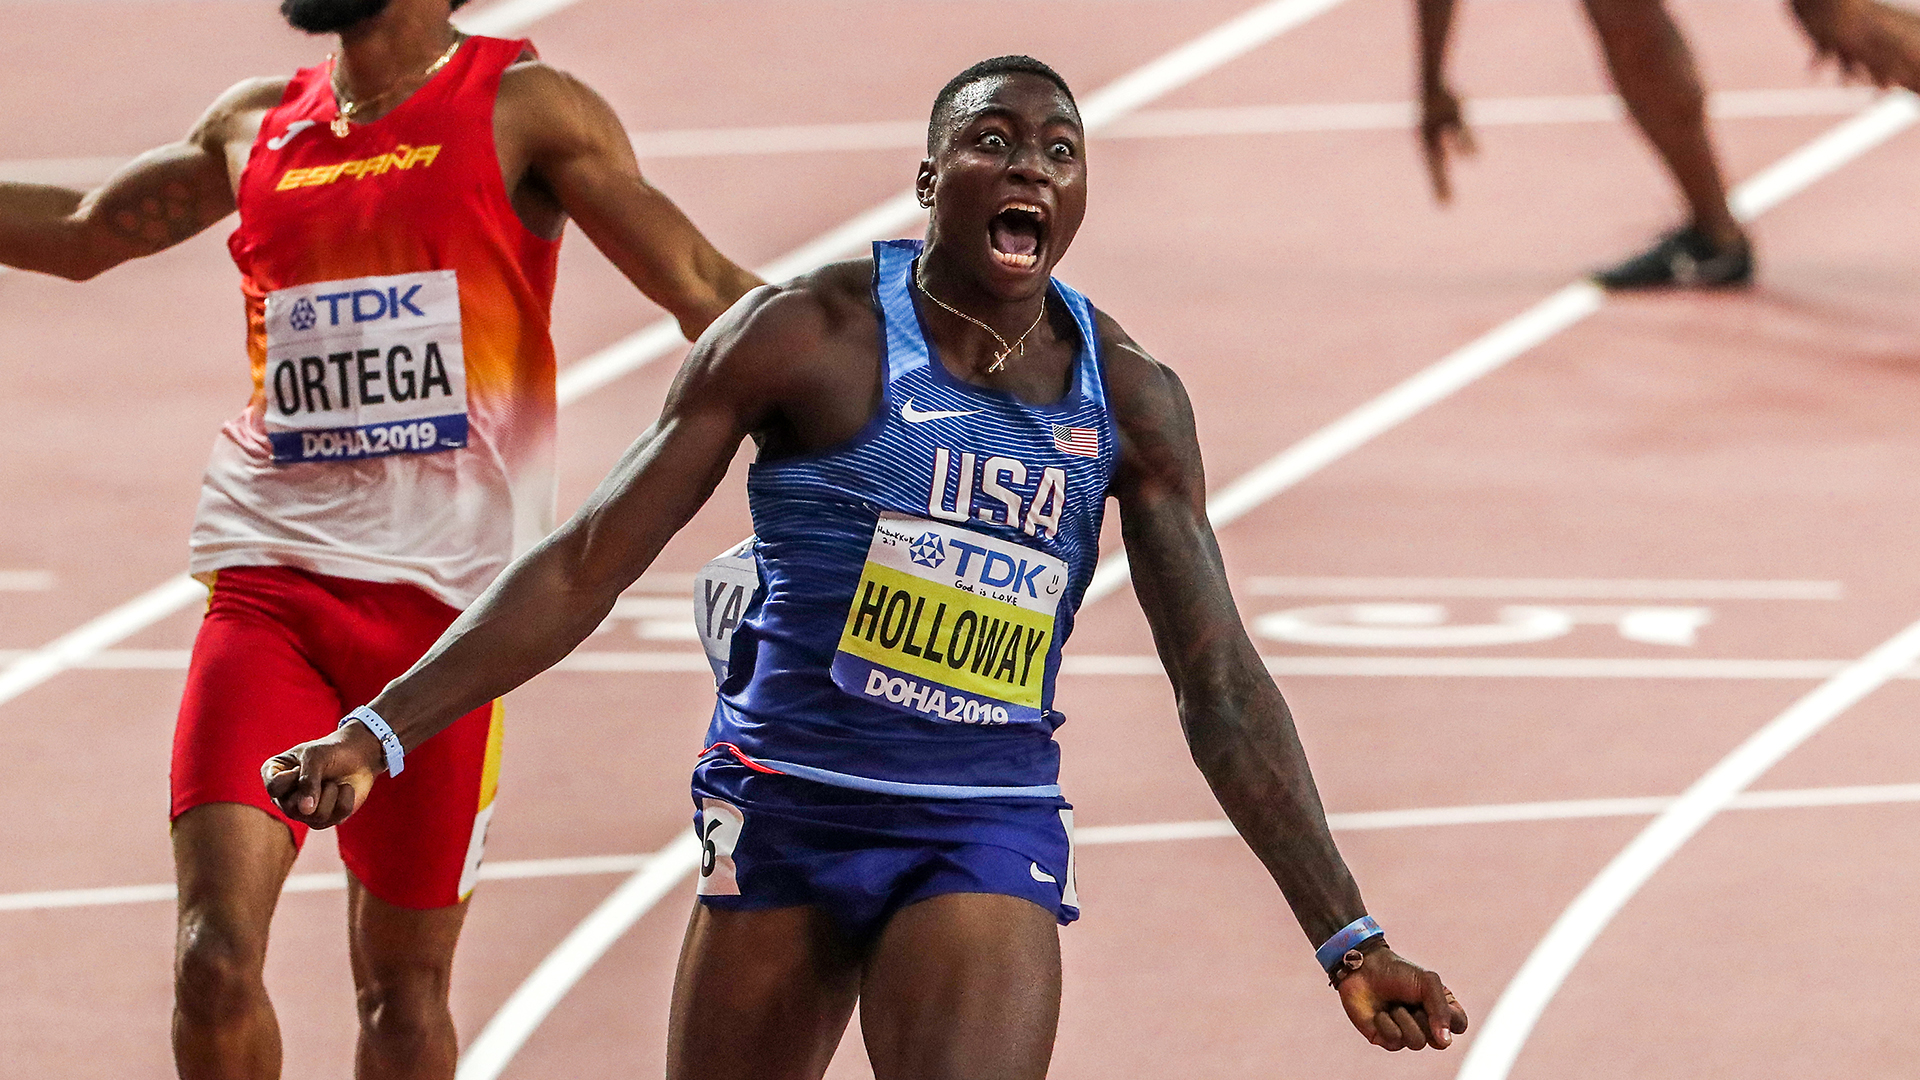 Grant Holloway celebrates with emotion after winning a track race for Team USA.